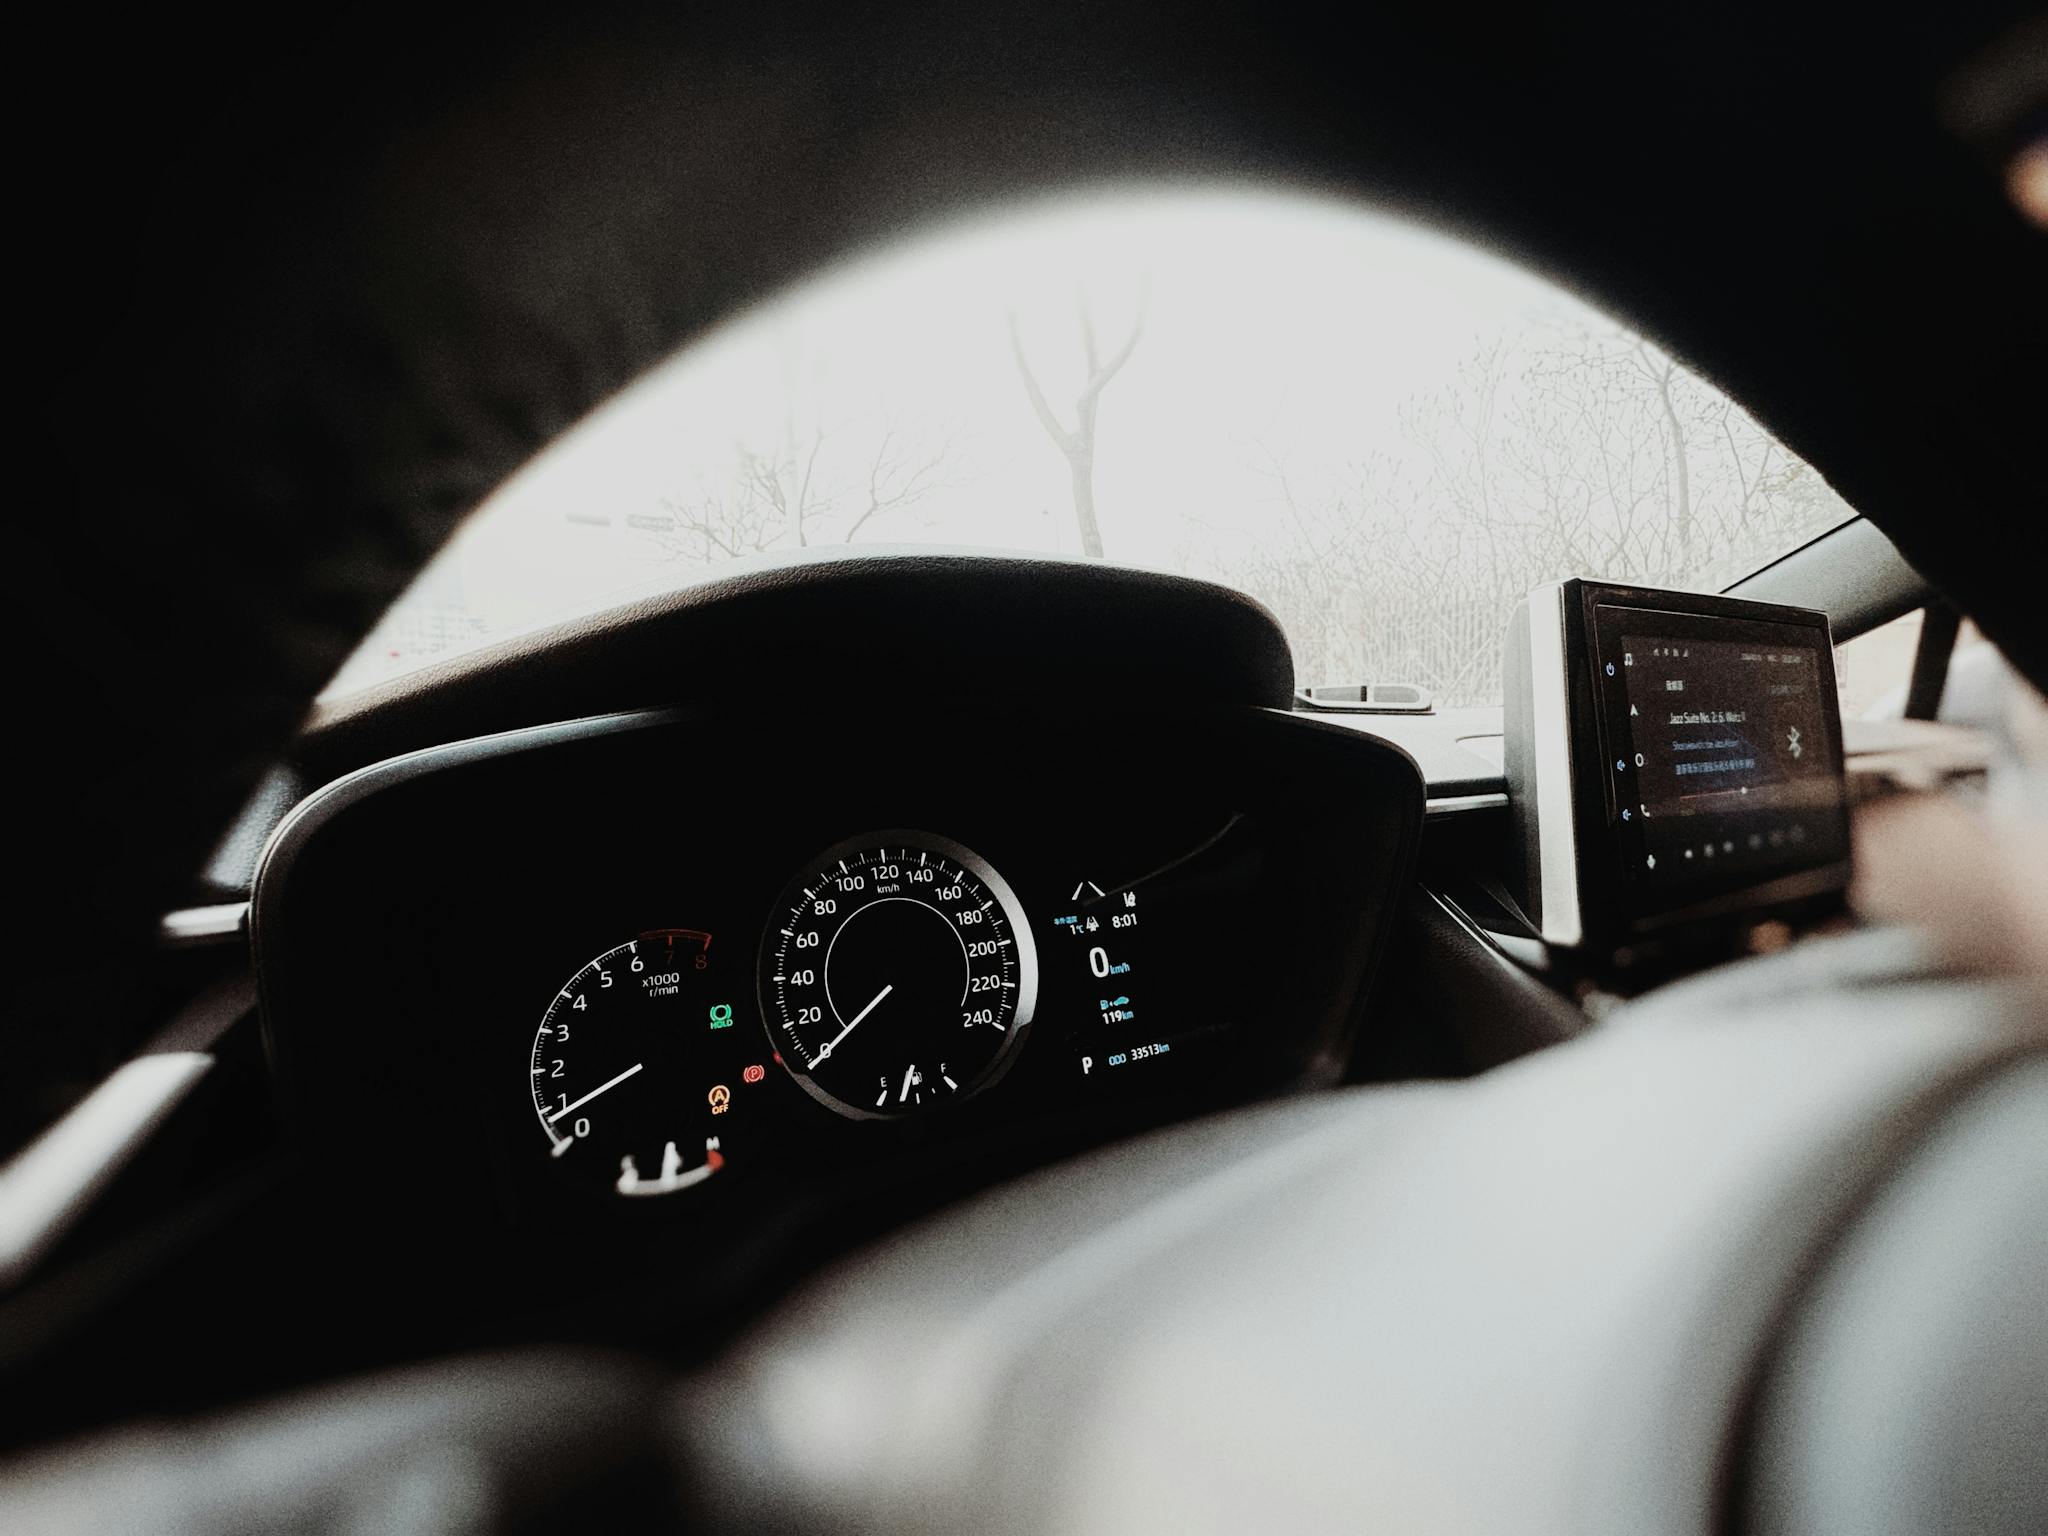 A dashboard view of a car with a dashboard